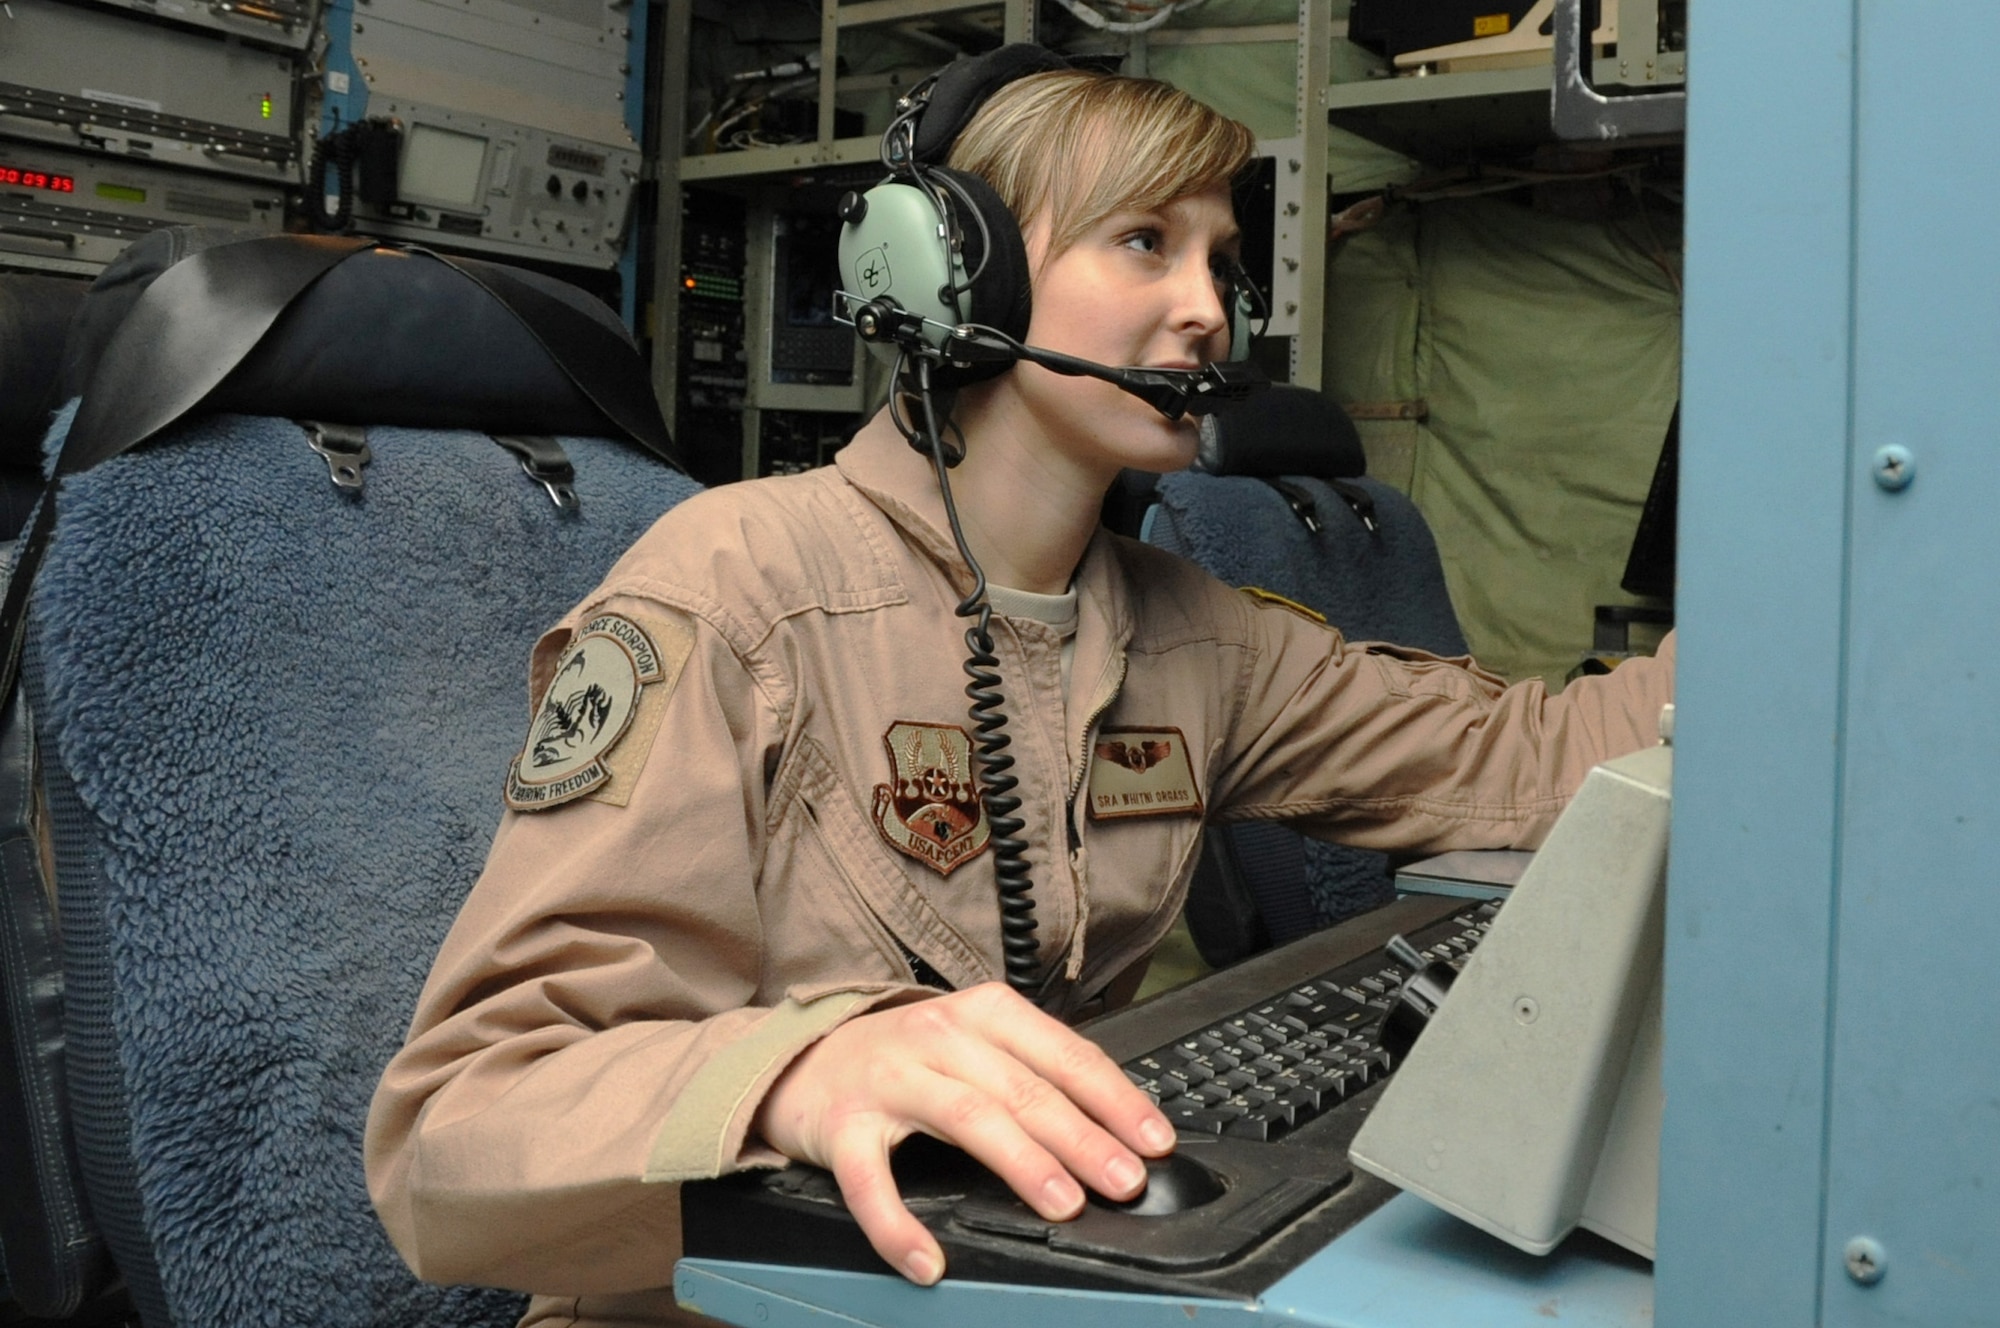 Senior Airman Whitni Orgass, 41st Expeditionary Electronic Combat Squadron cryptological language analyst, works at her station aboard an EC-130 Compass Call aircraft on Bagram Airfield, Afghanistan, March 23, 2013. The 41st EECS flies nightly missions in support of troops on the ground. (U.S. Air Force photo/Staff Sgt. David Dobrydney)